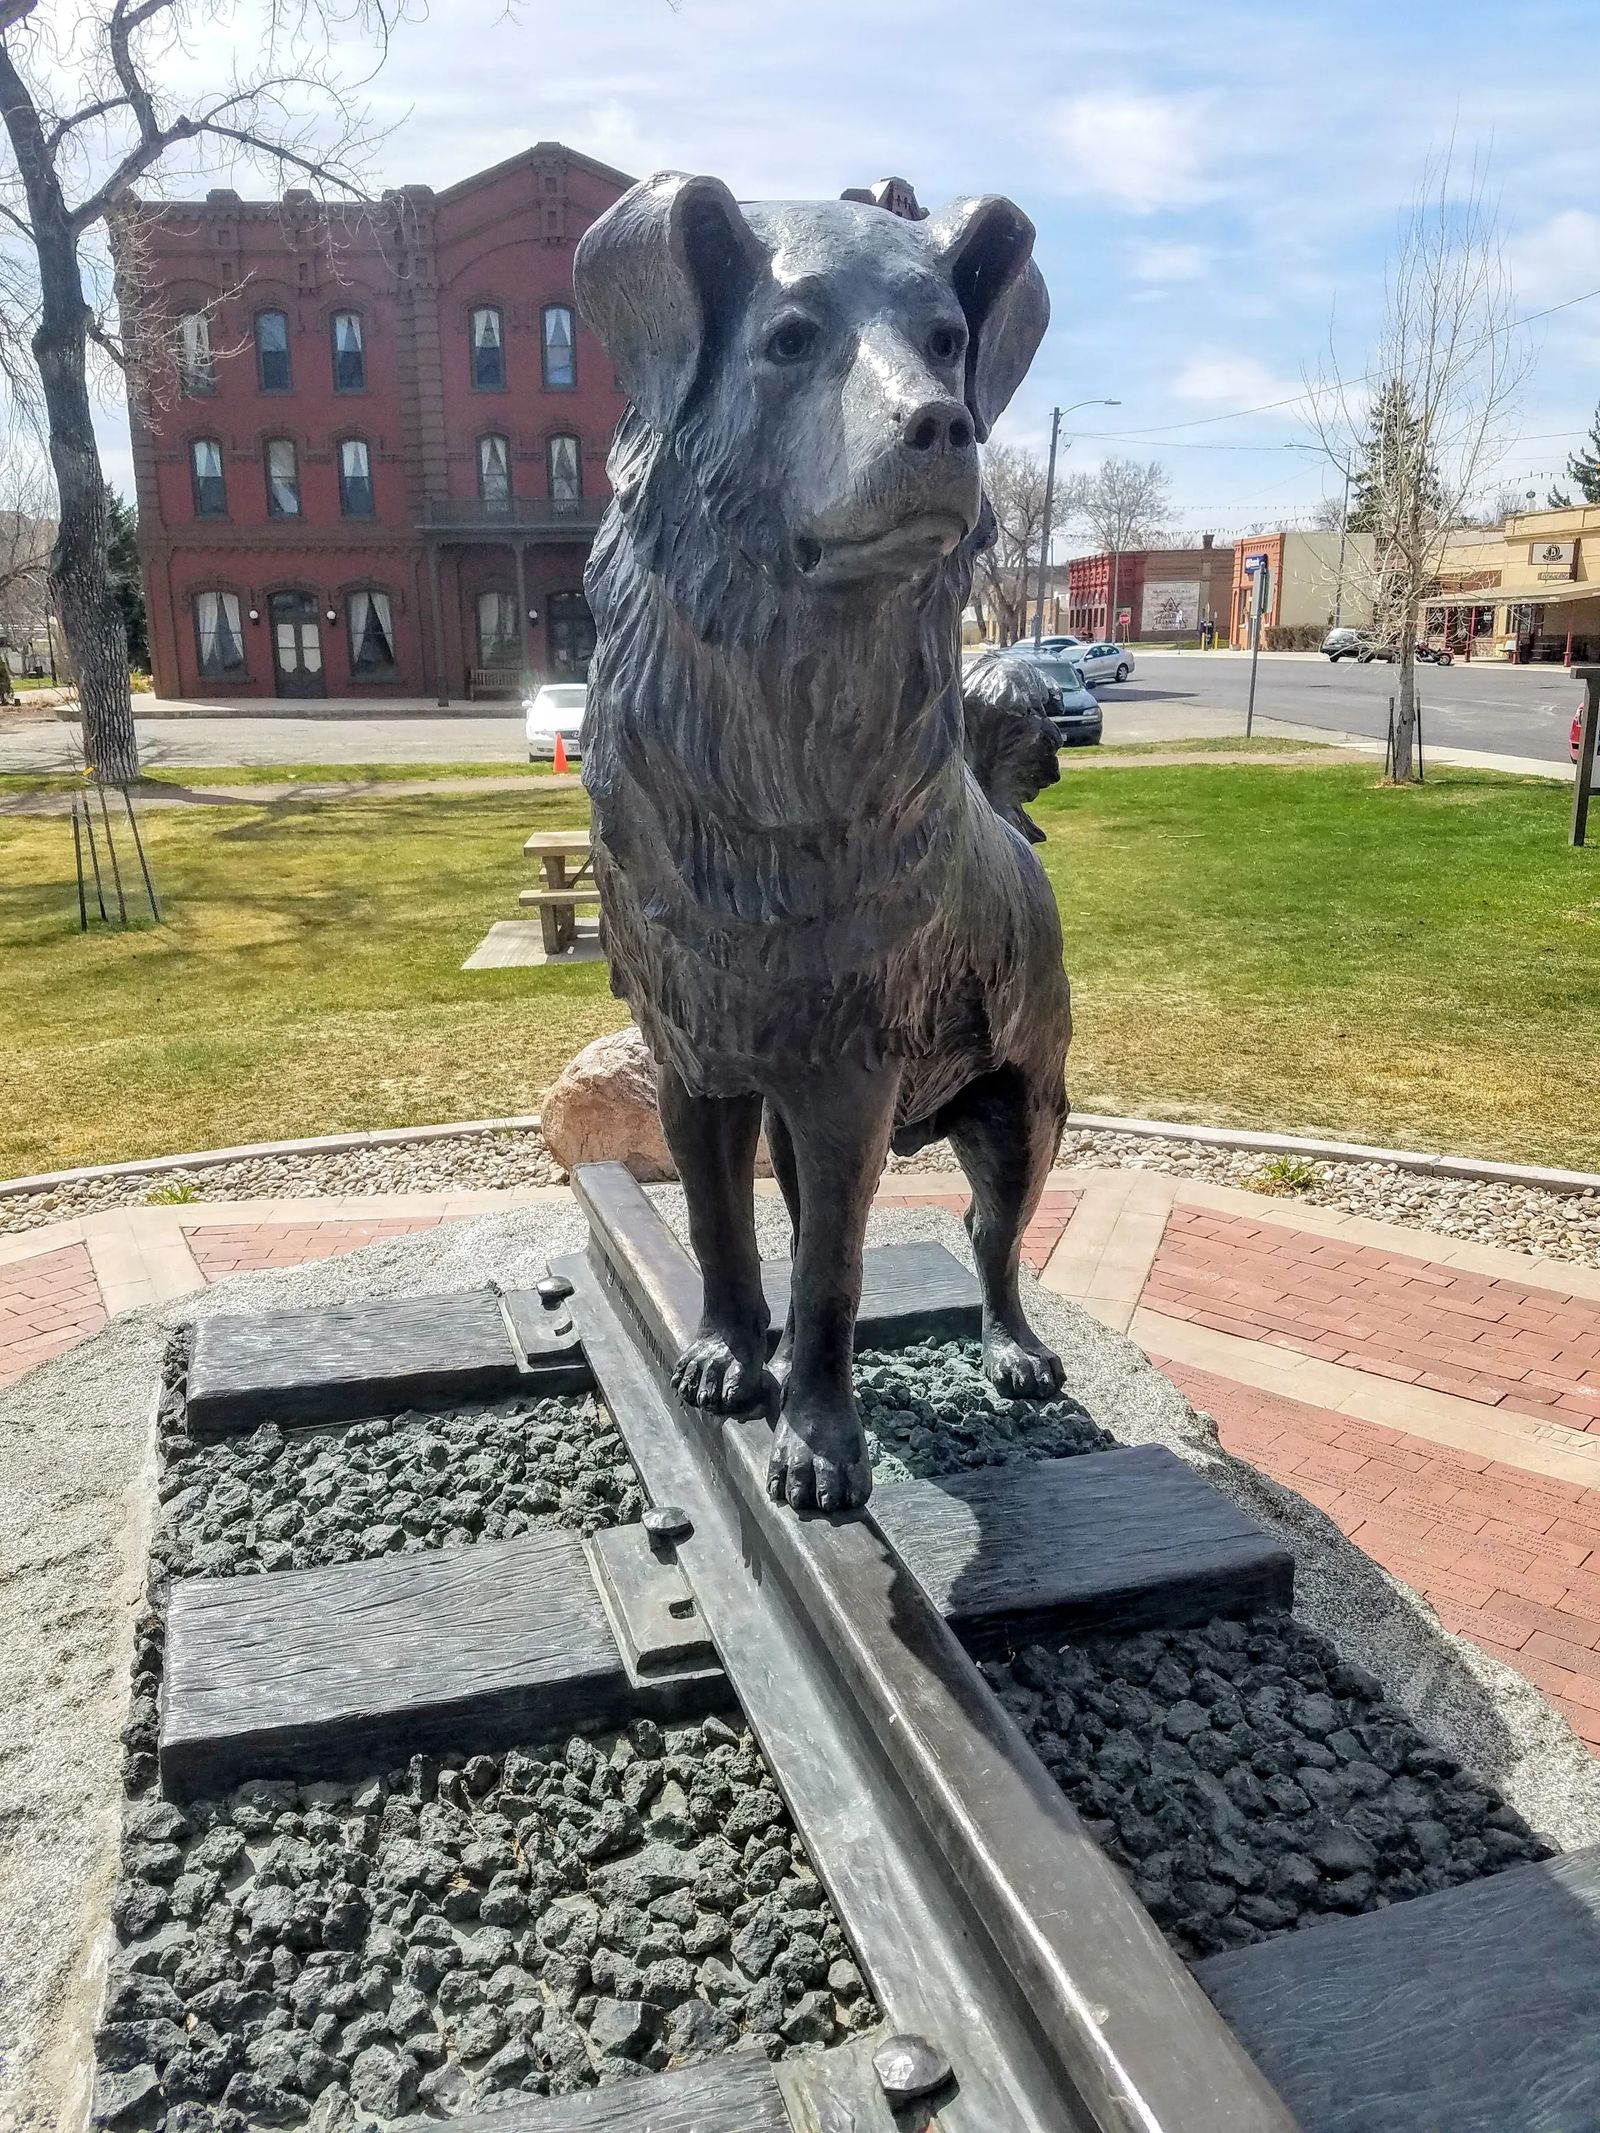 Photo of the statue of Shep in Fort Benton, Montana